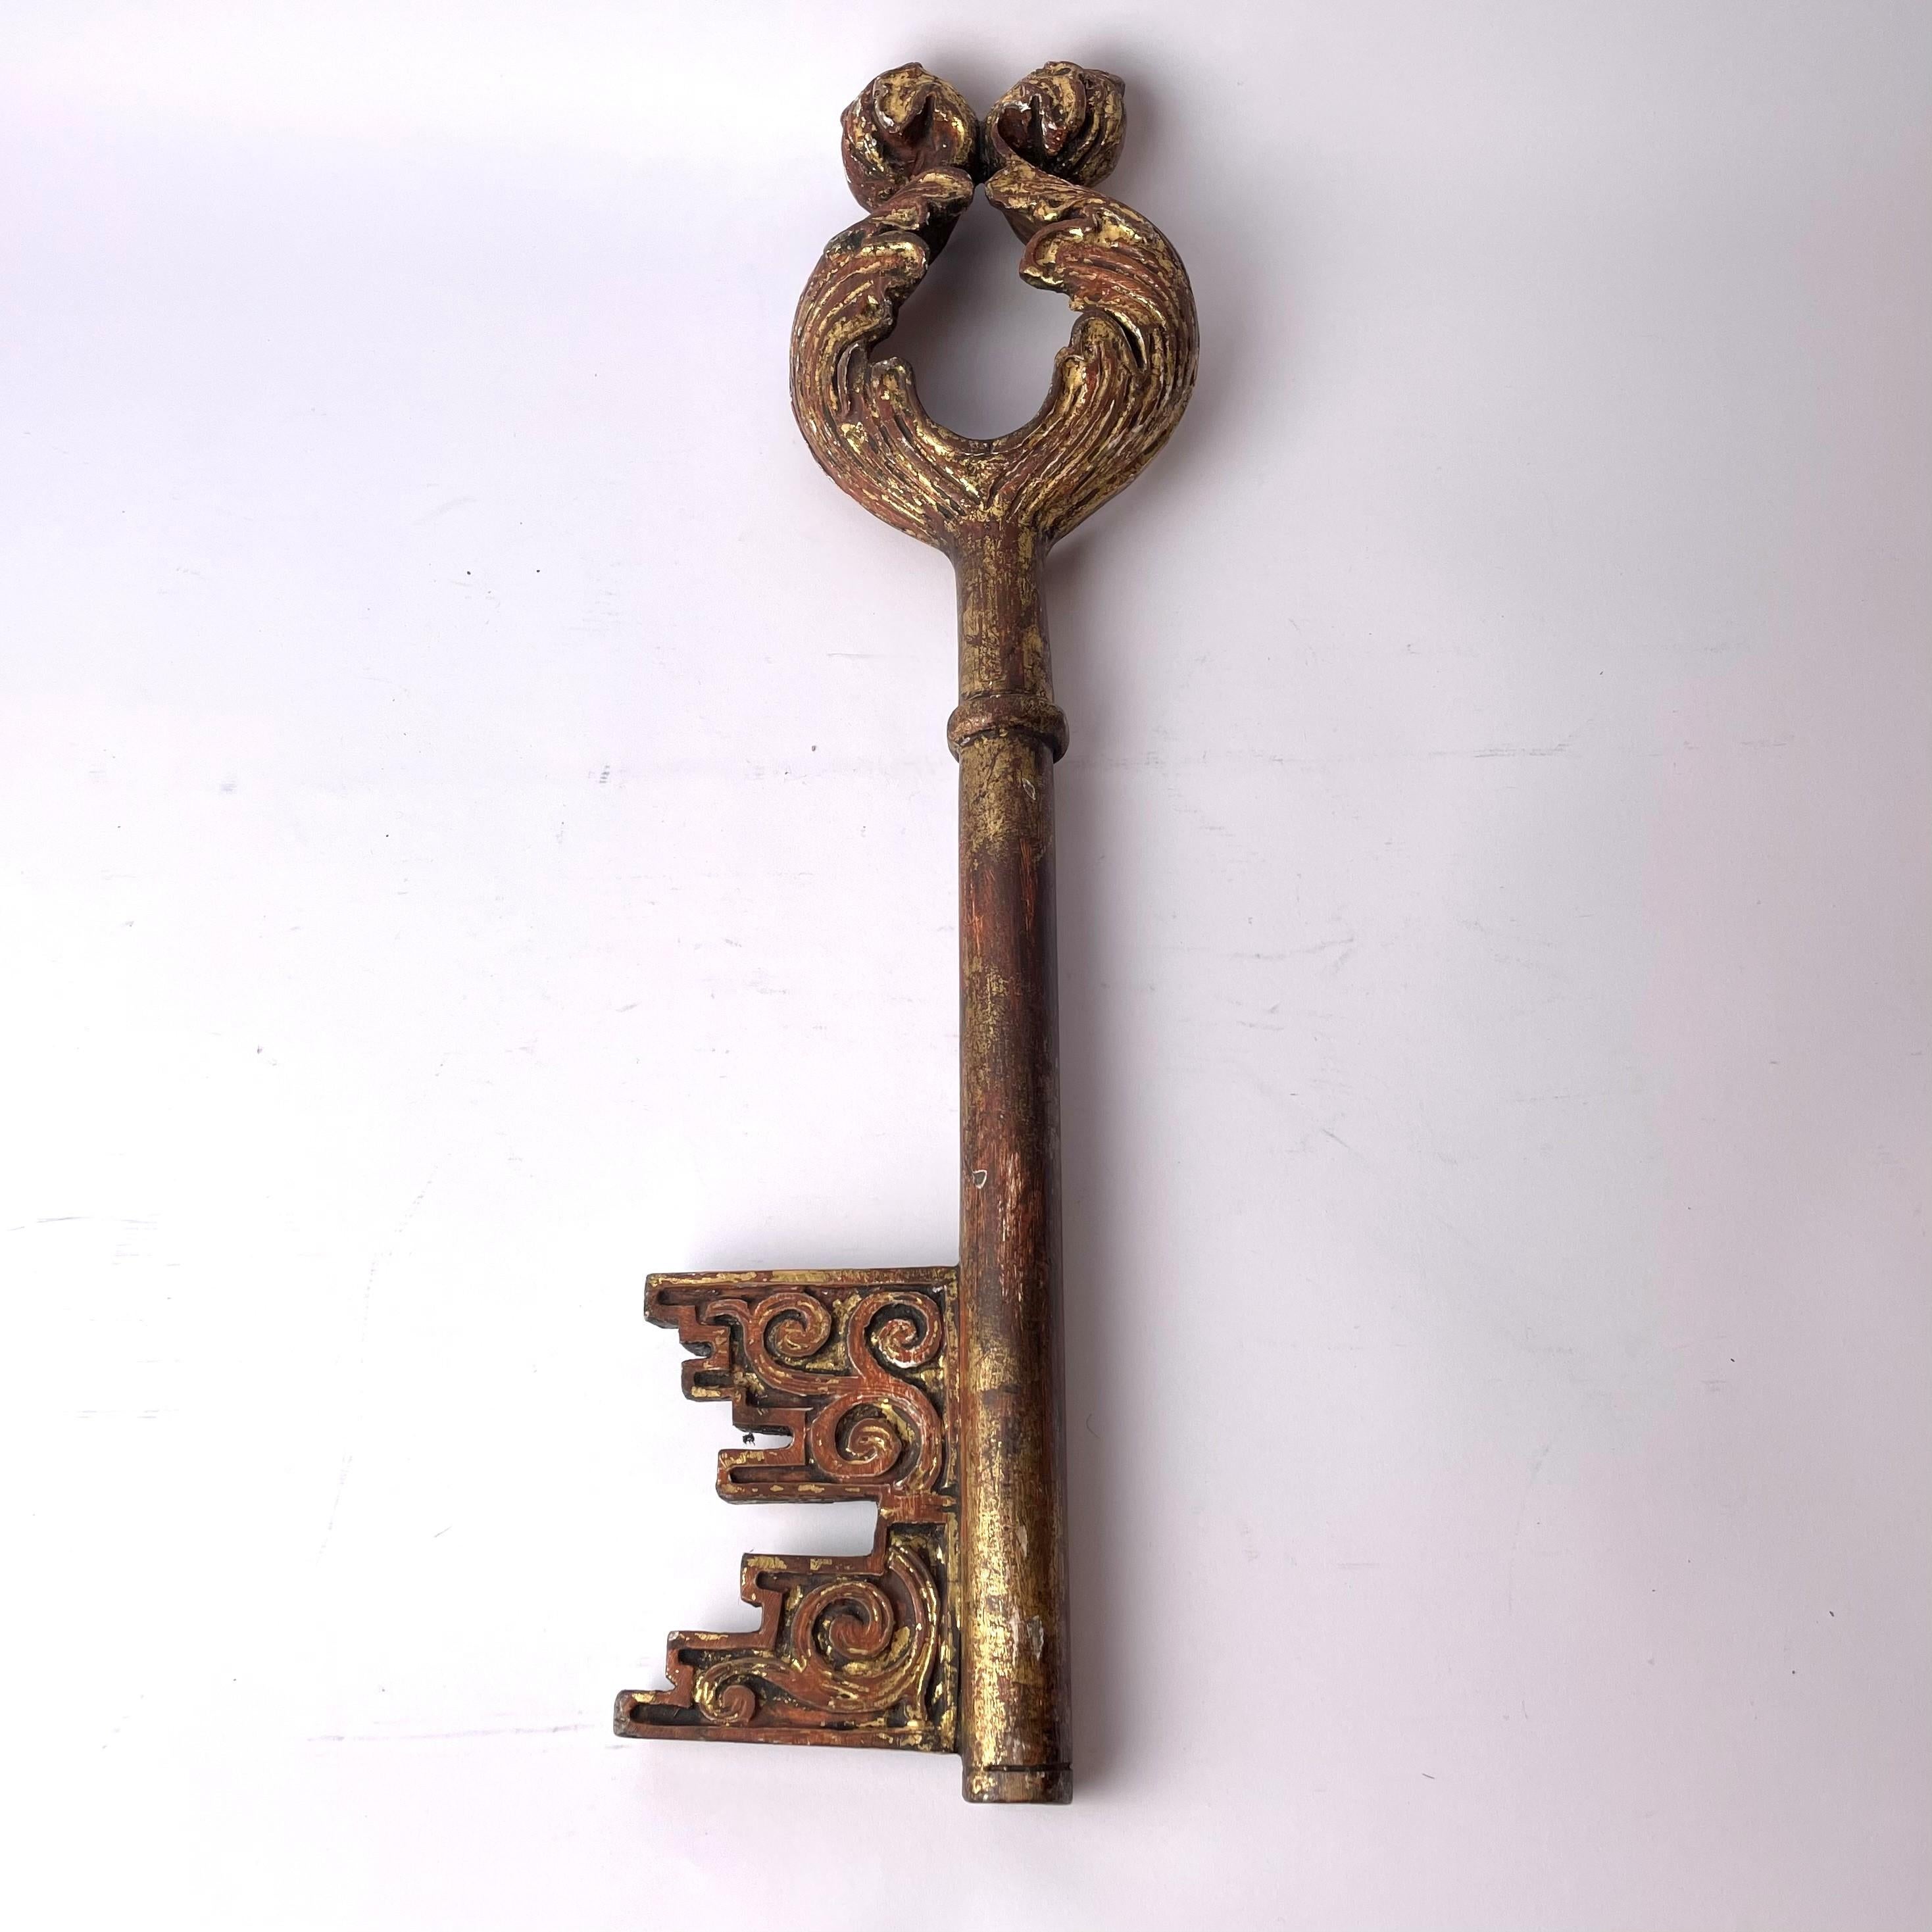 Baroque Very Large Woodcut and Gilded Key from the 17th Century